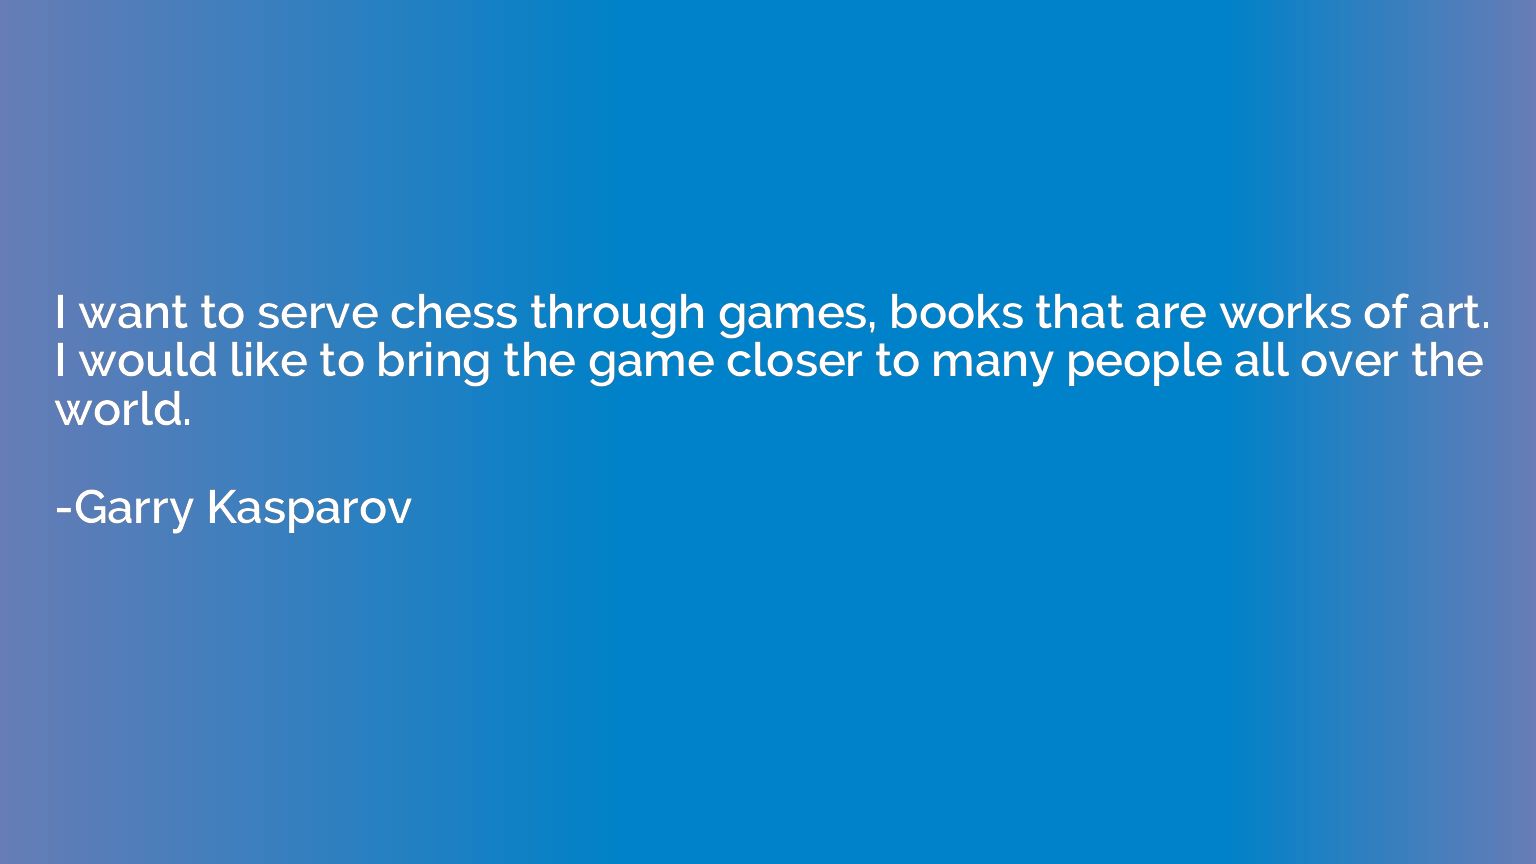 I want to serve chess through games, books that are works of